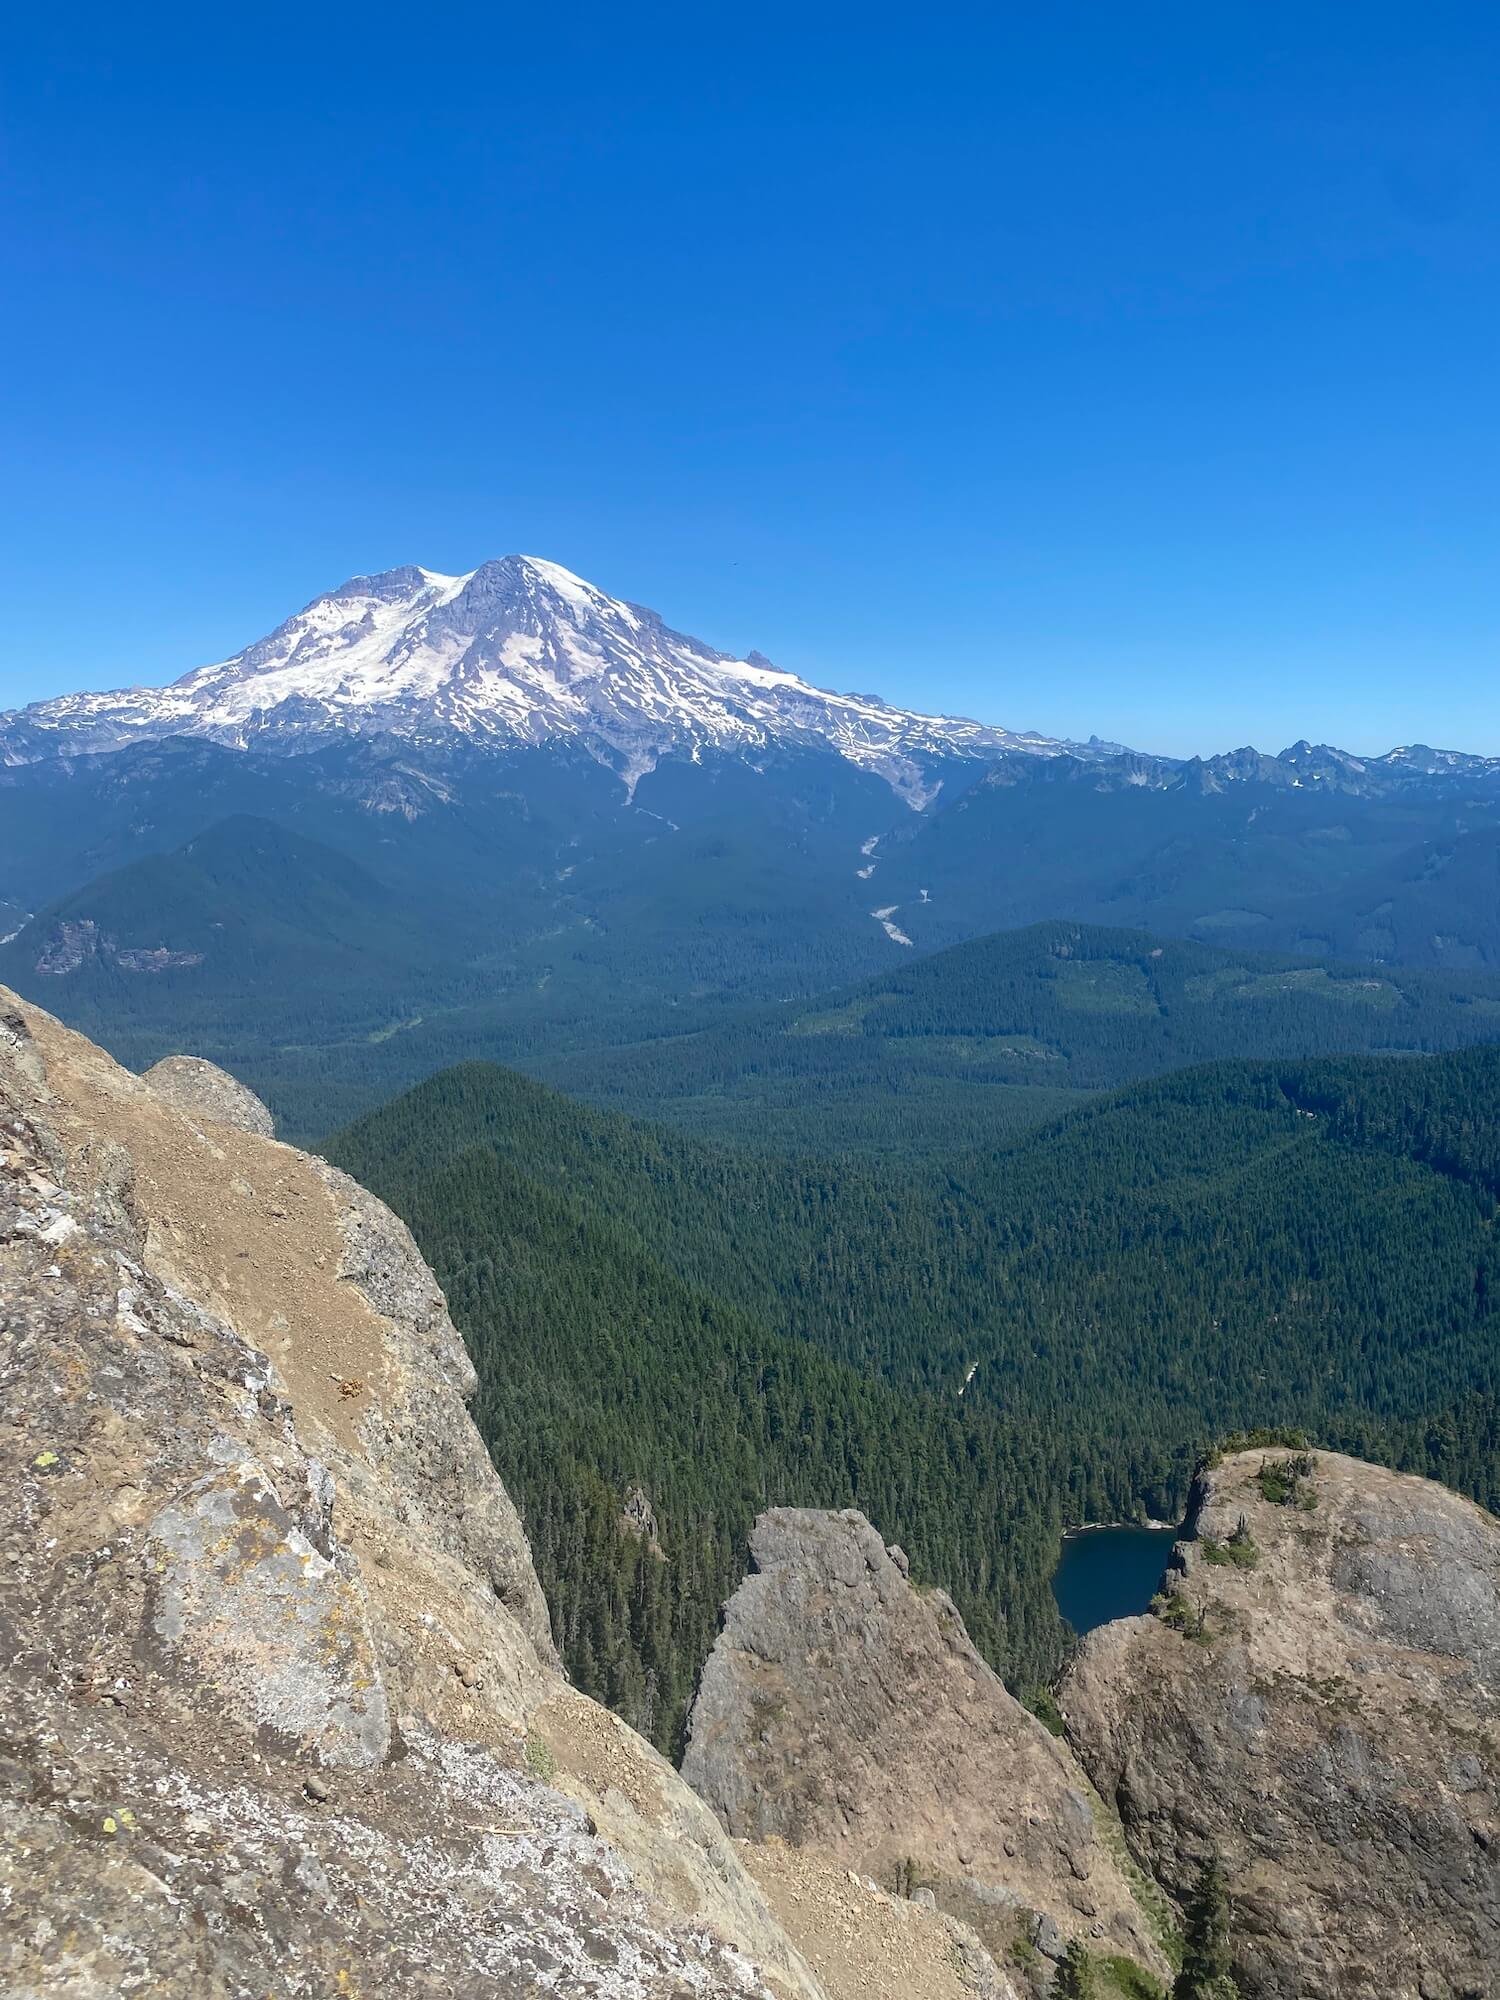  View from Mount Fremont lookout. Photo: Sam Goldklang 